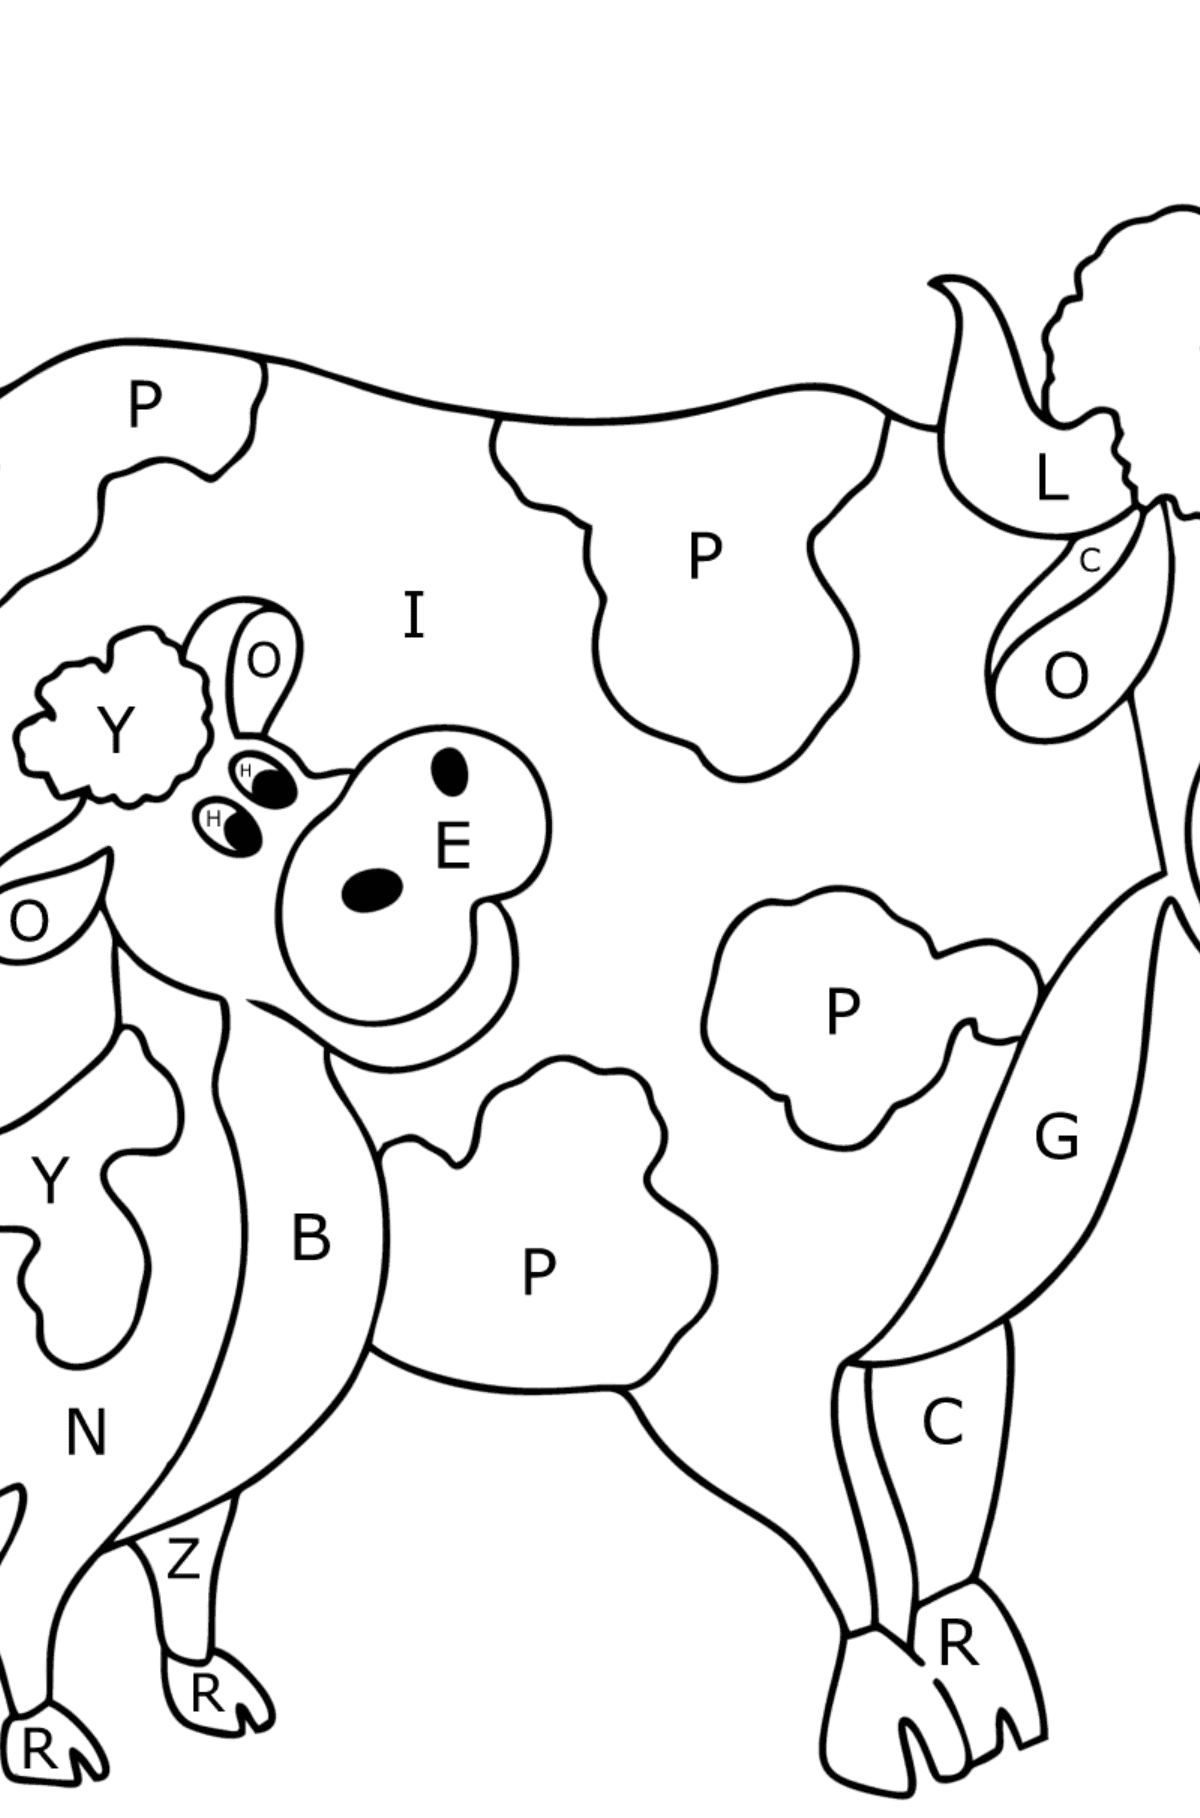 Cow and calf coloring pages - Coloring by Letters for Kids